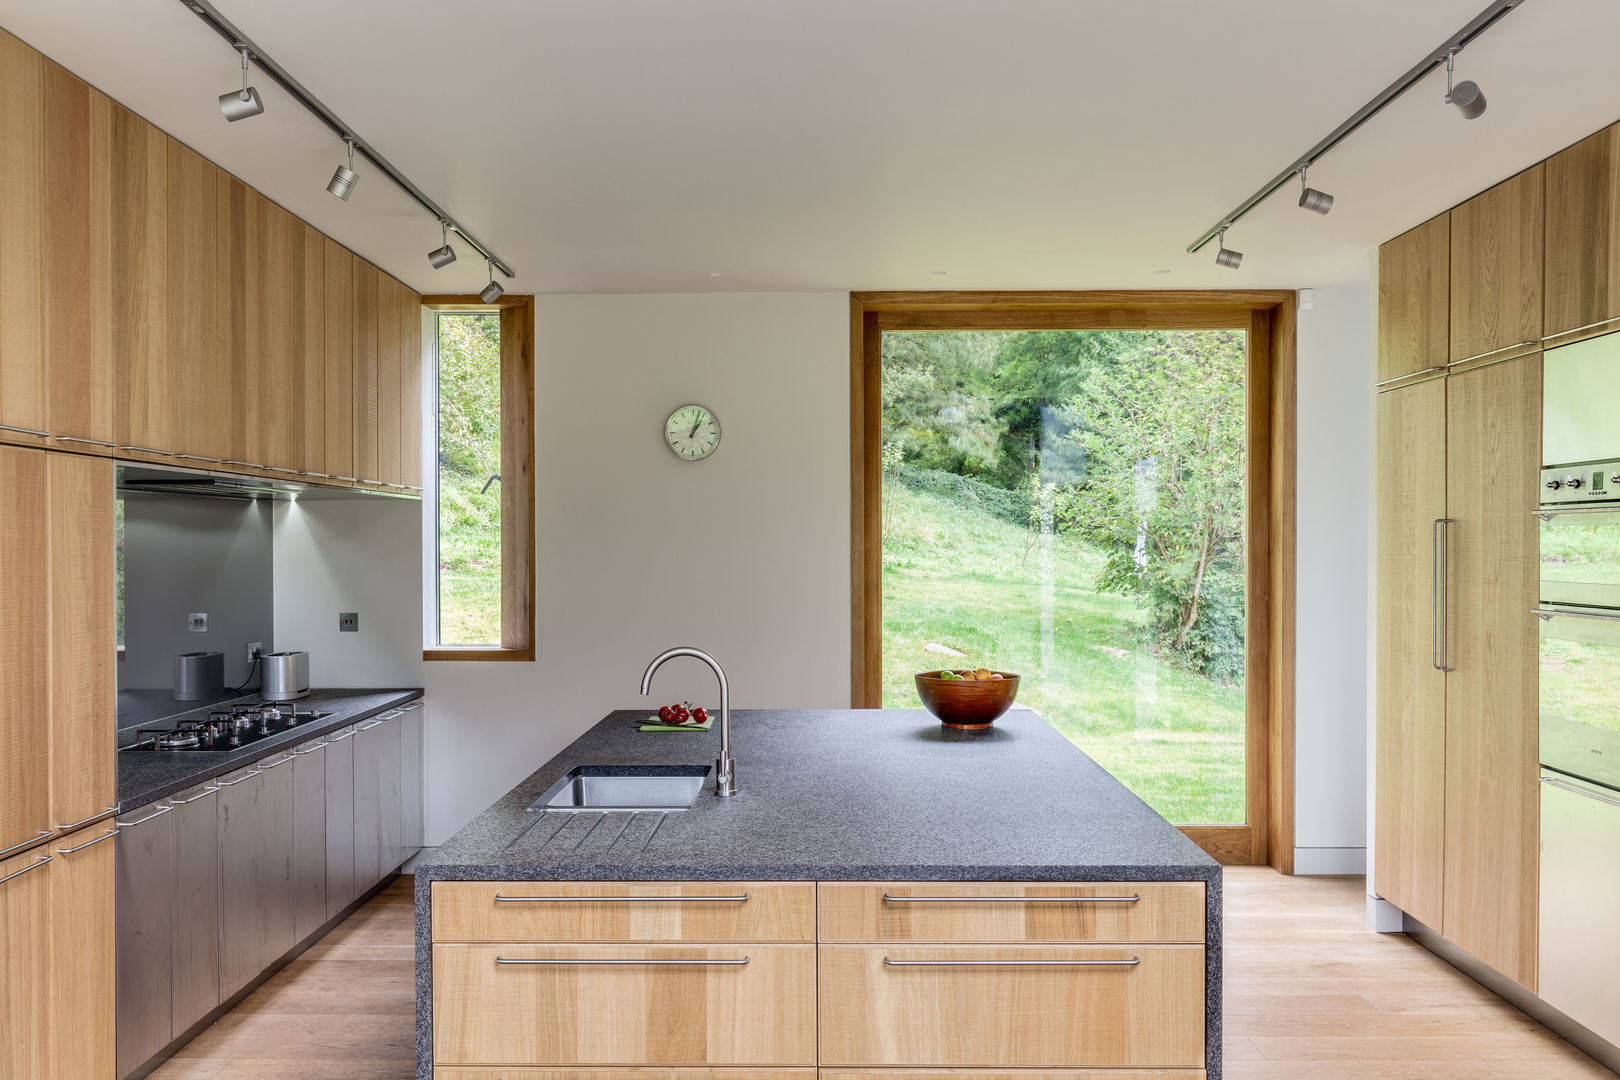 The Nook, Hall + Bednarczyk Architects Hall + Bednarczyk Architects Modern kitchen